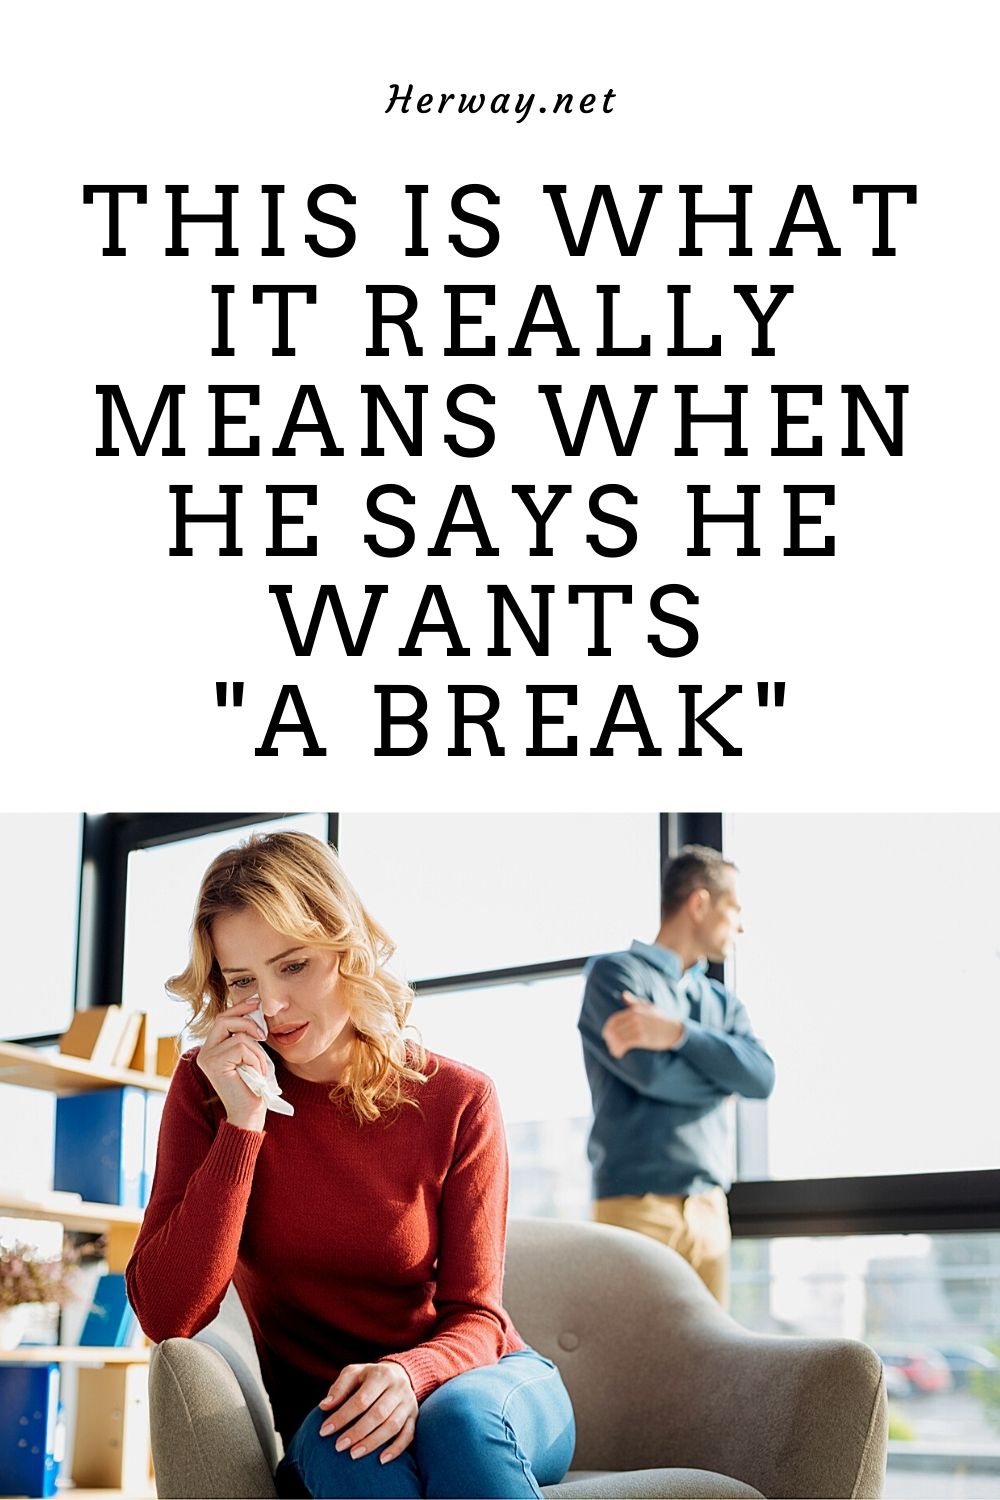 This Is What It Really Means When He Says He Wants "A Break"